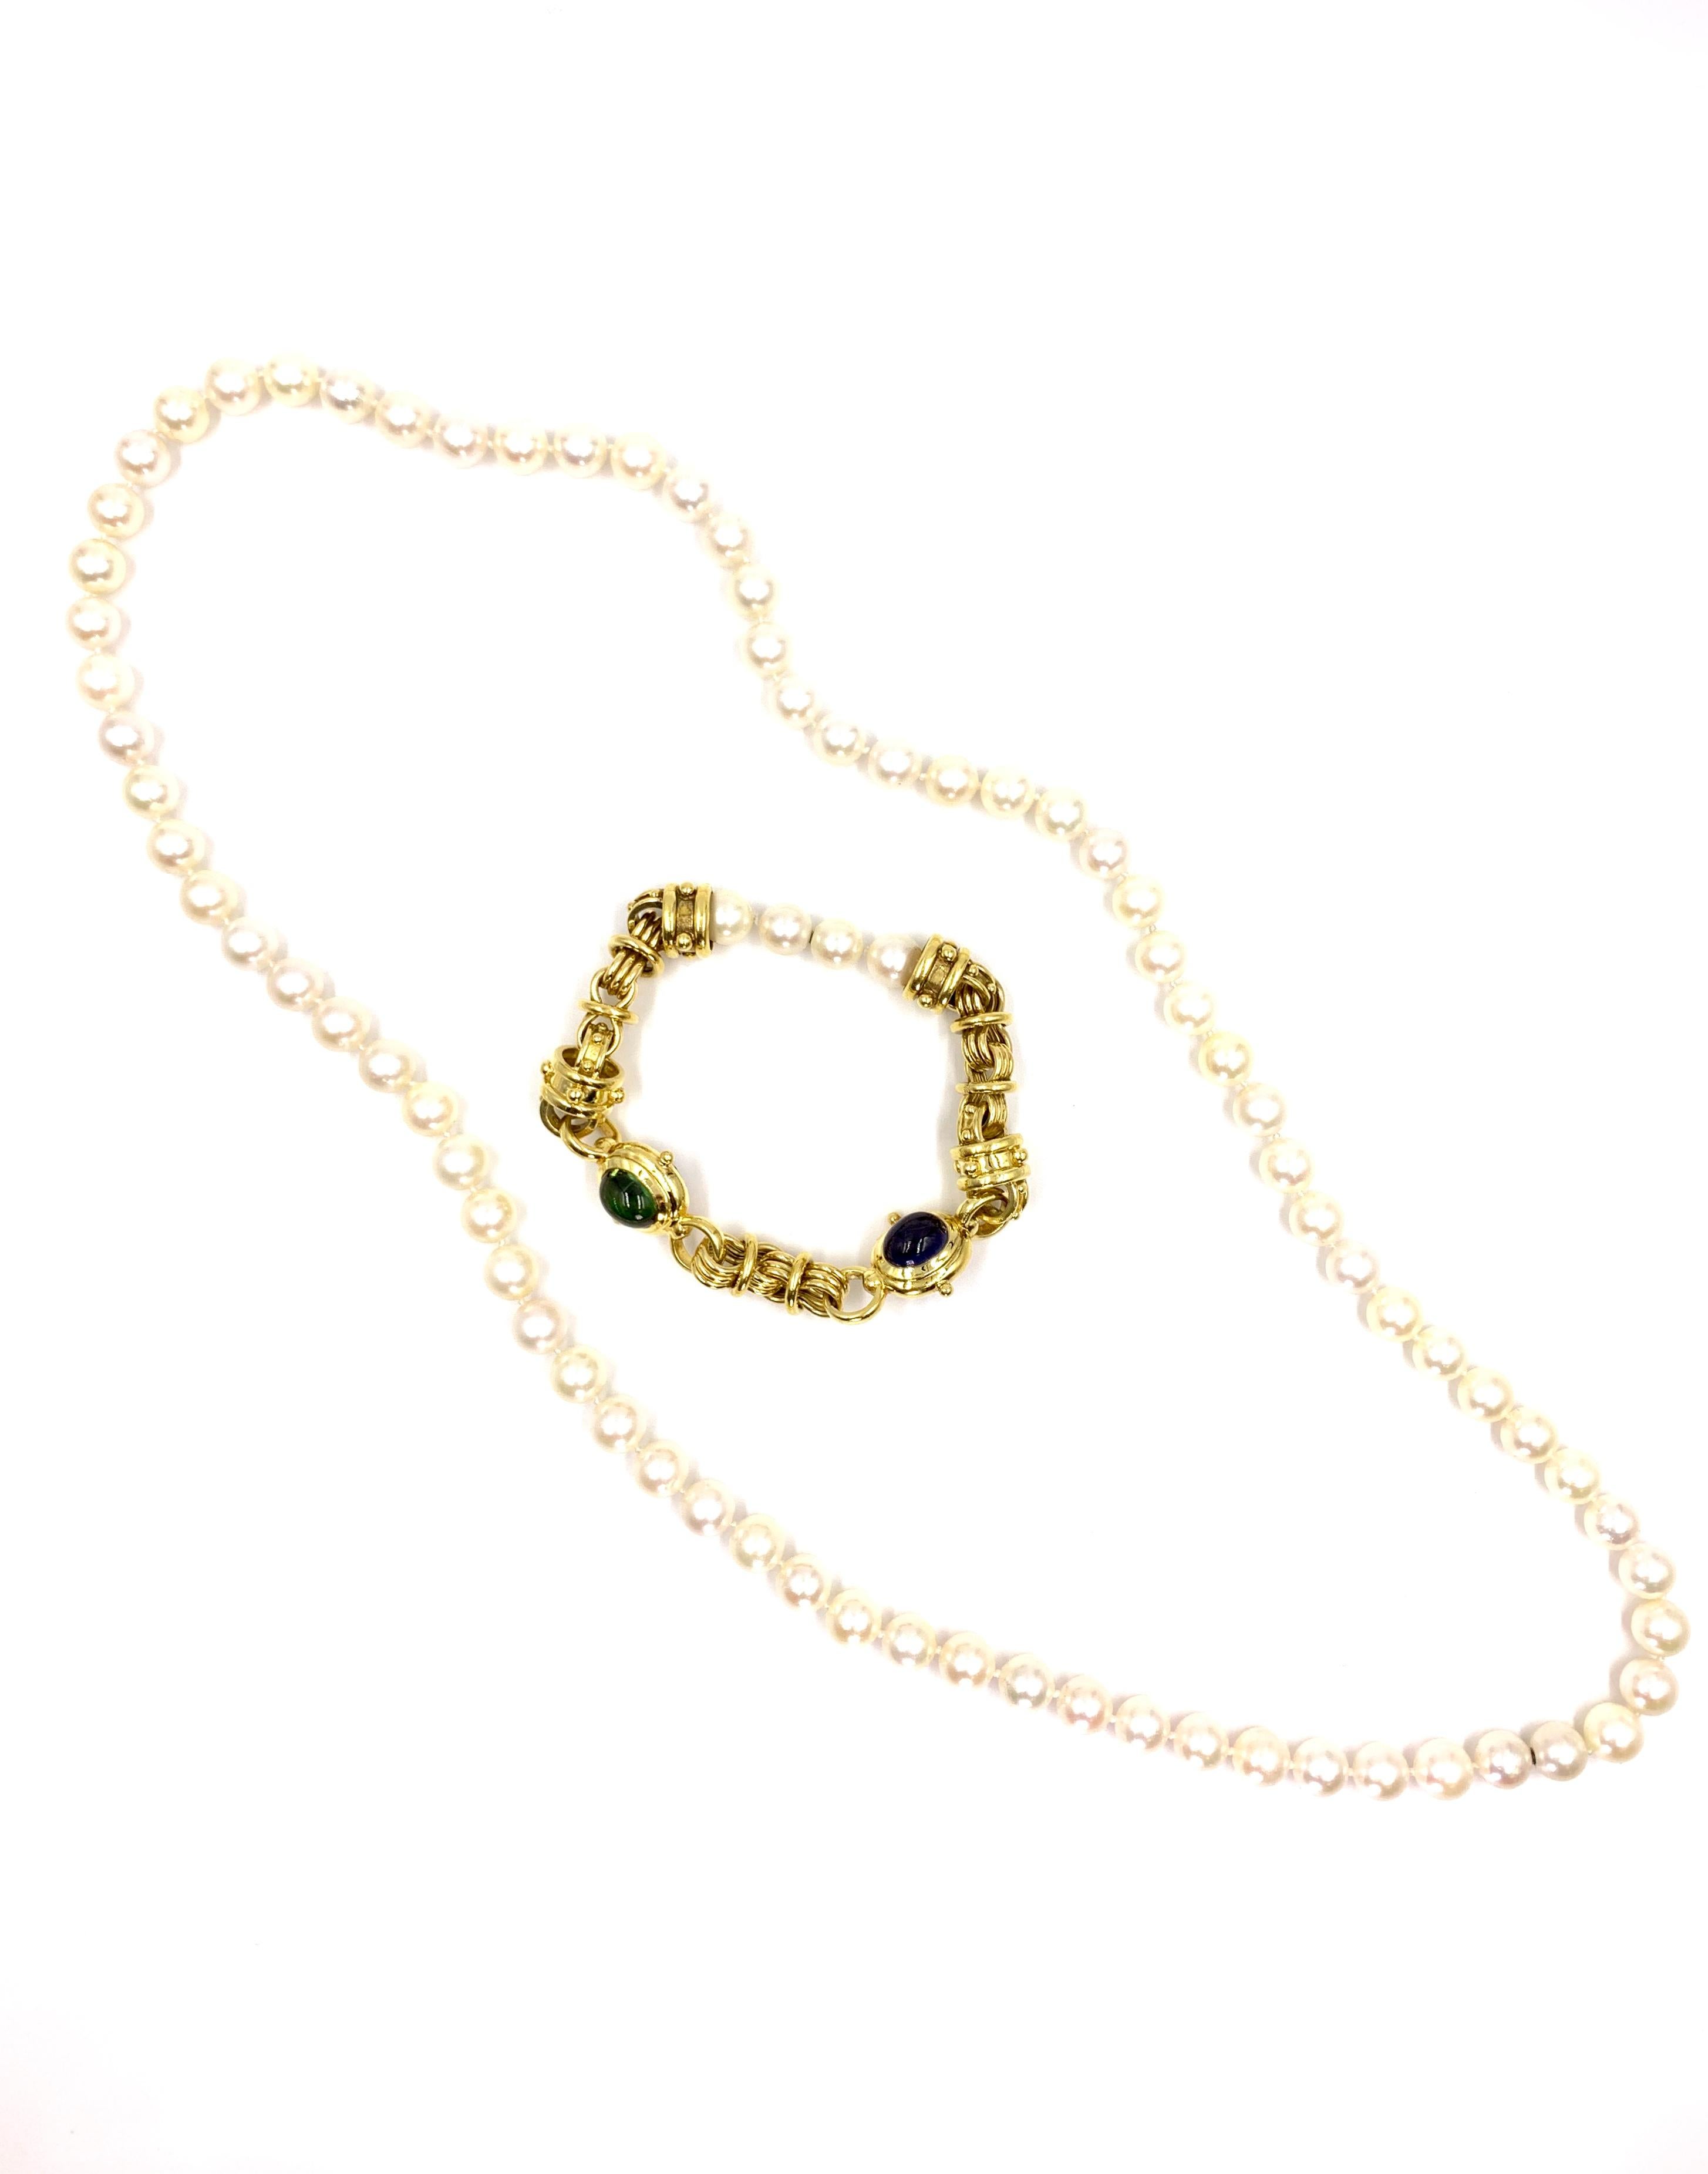 A beautiful and versatile piece with several wearable options. This long cultured pearl necklace can be worn with the 18 karat gemstone linked bracelet attached or separately using 